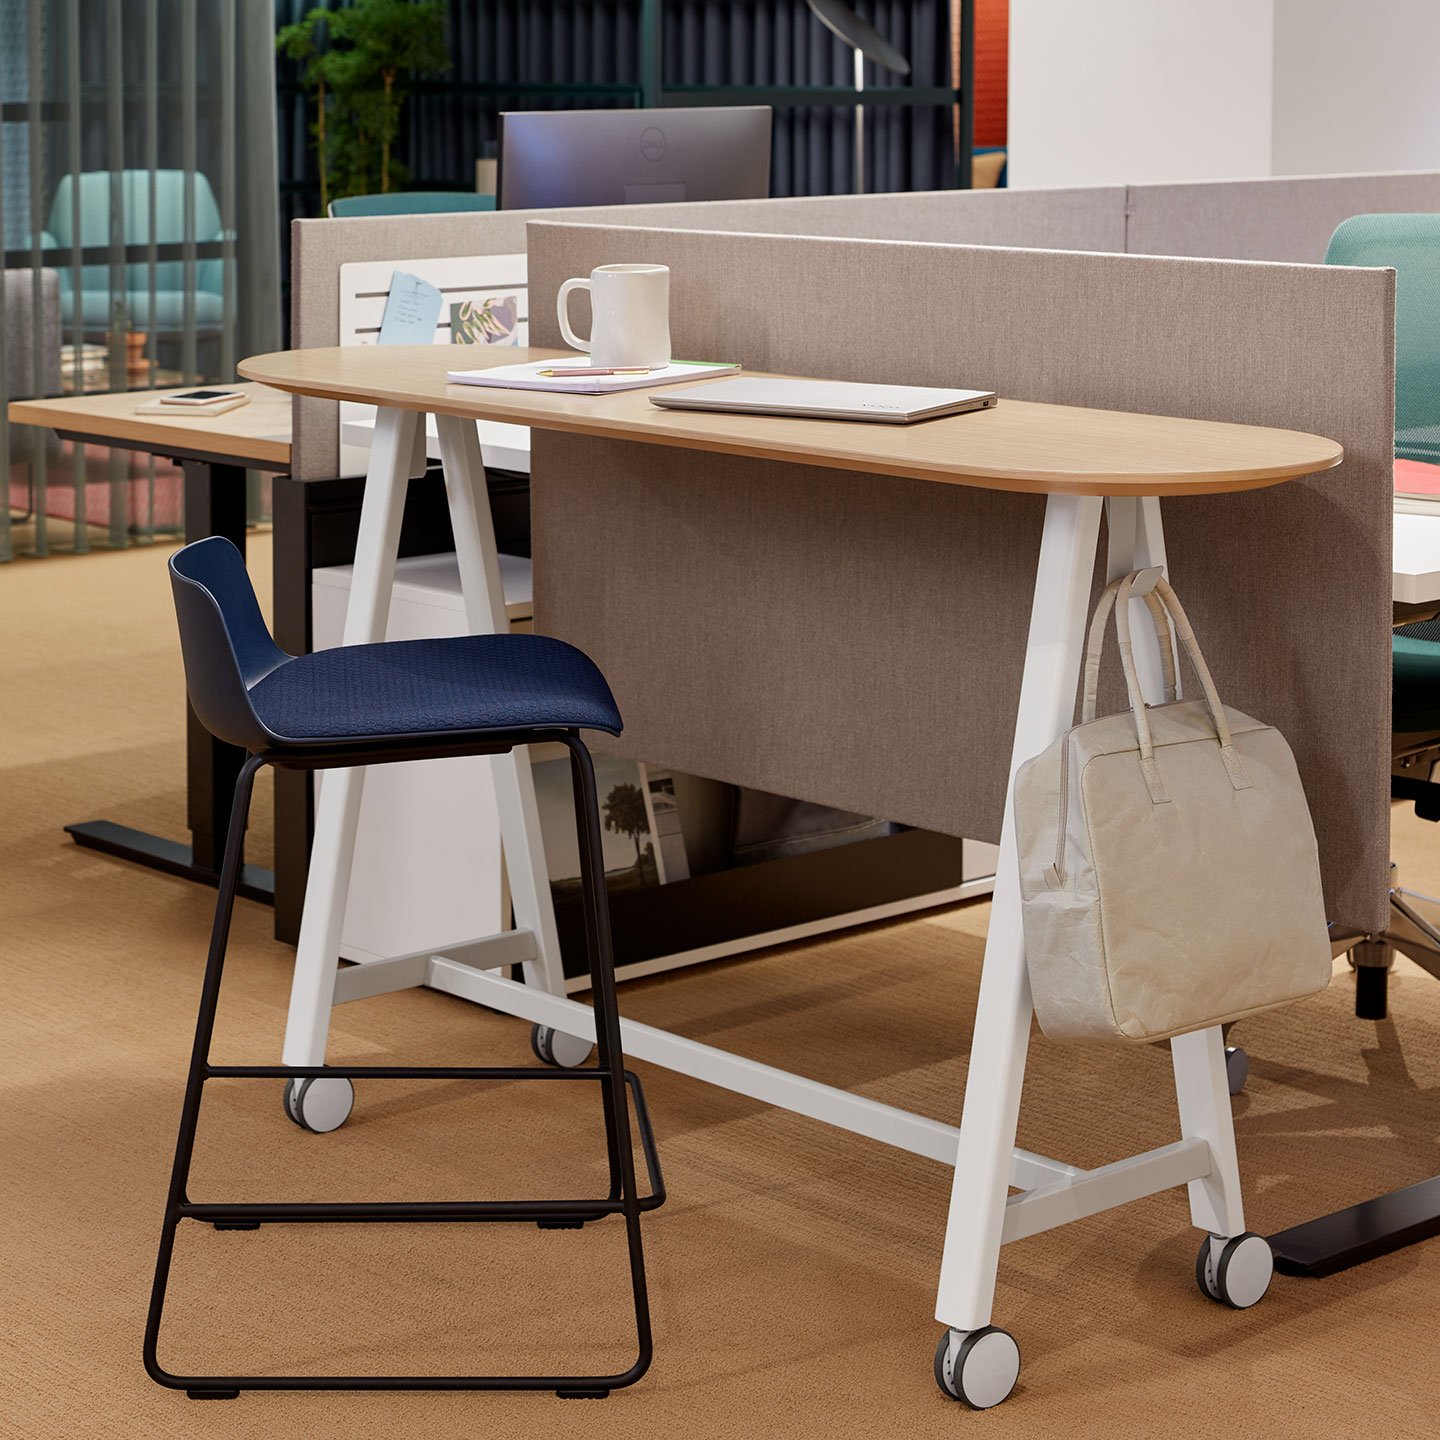 Haworth PopUp Table in a open office space with a laptop and mug on the table